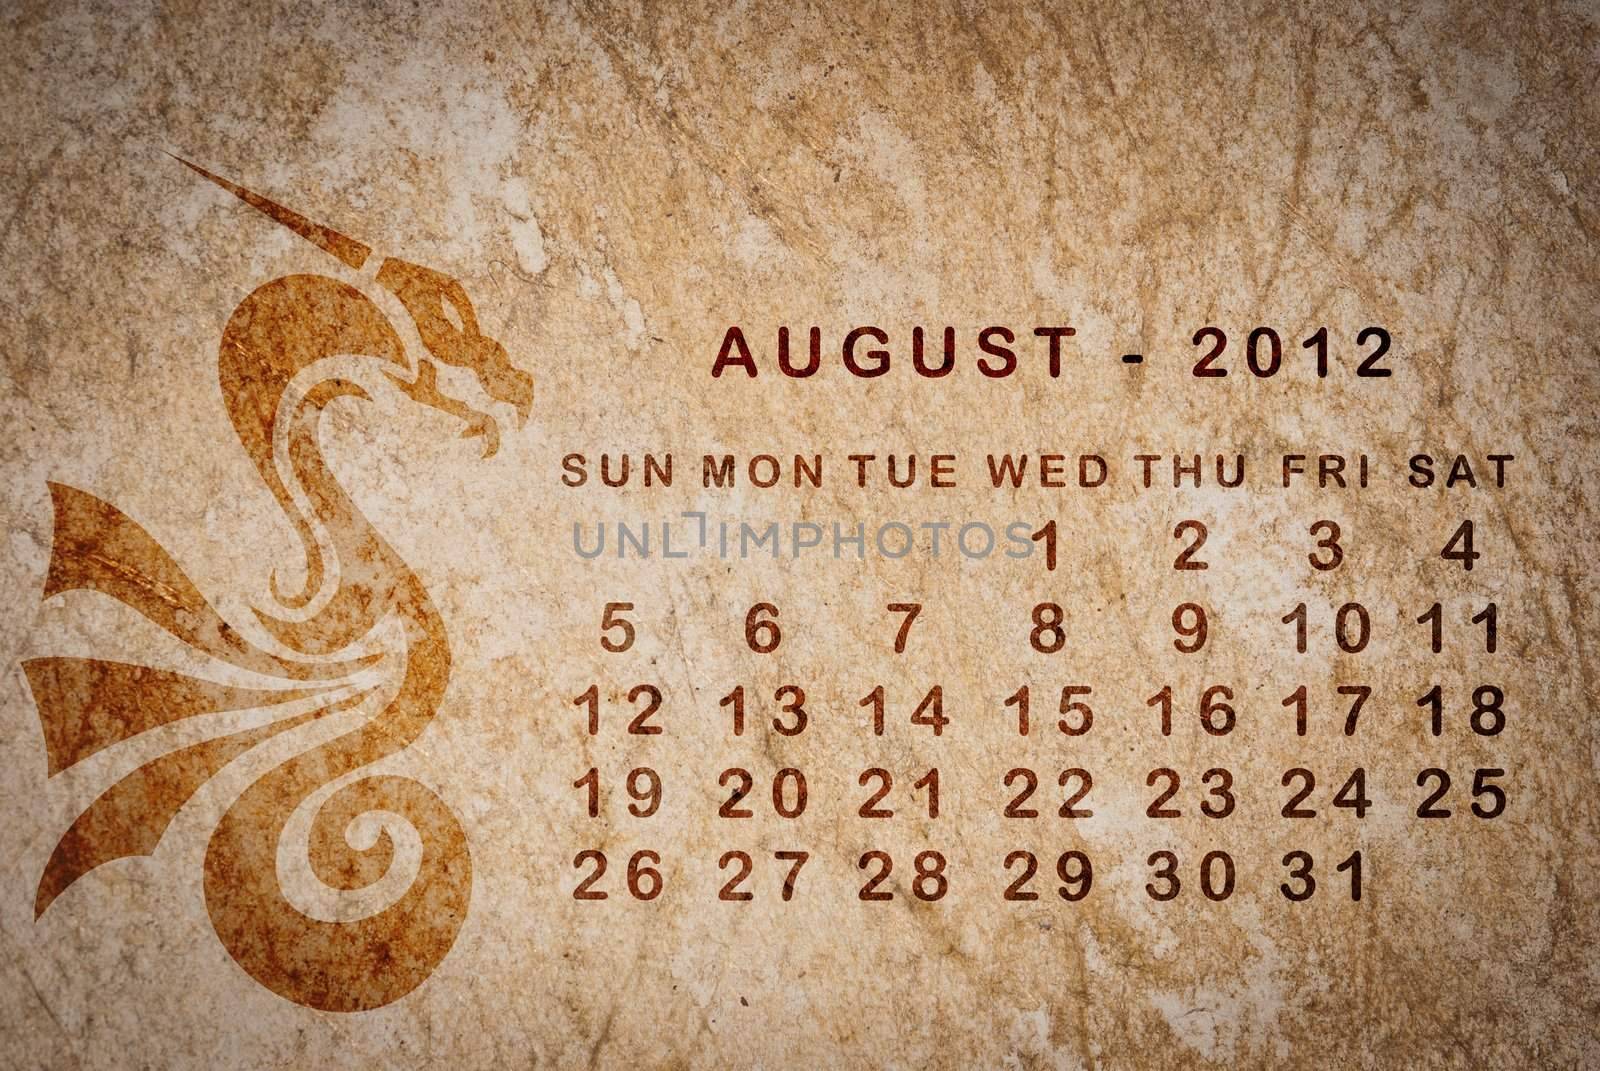 2012 year of the Dragon calendar on old vintage paper, August